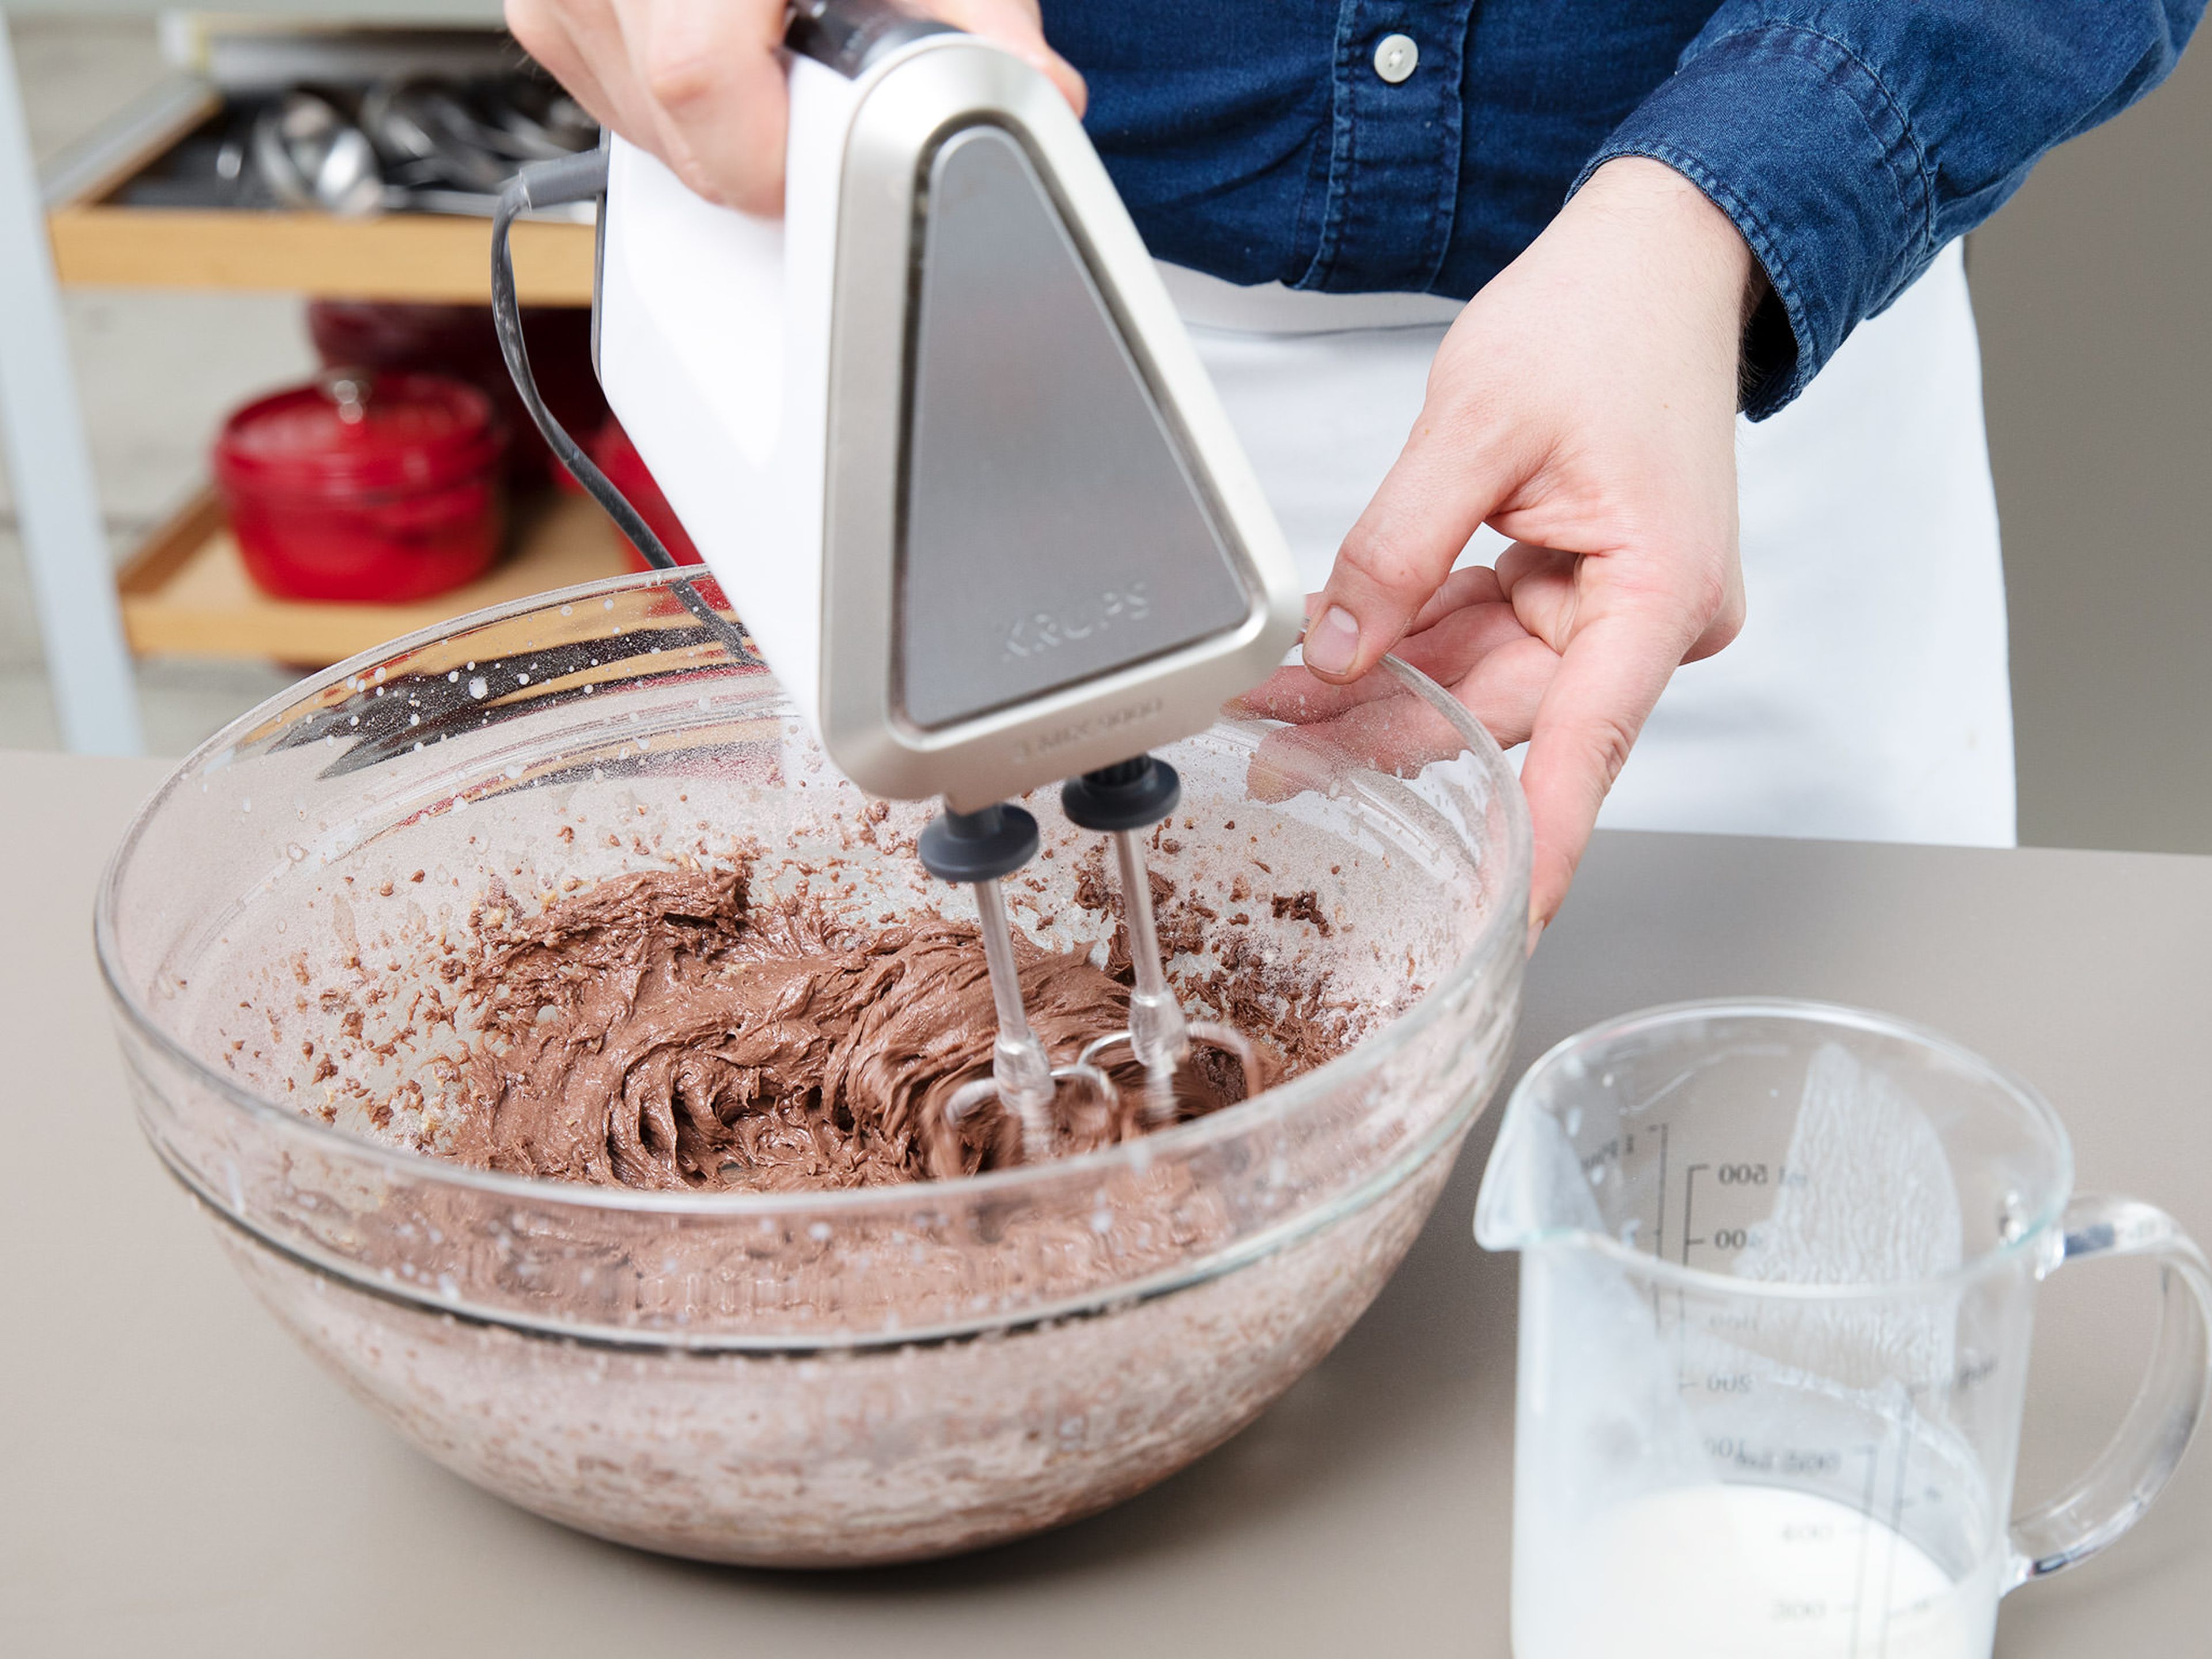 In a separate bowl, whisk together the flour, cocoa, baking soda, and salt. Add the dry ingredients to the butter-sugar mixture in three parts, alternating with the buttermilk, until everything is combined.